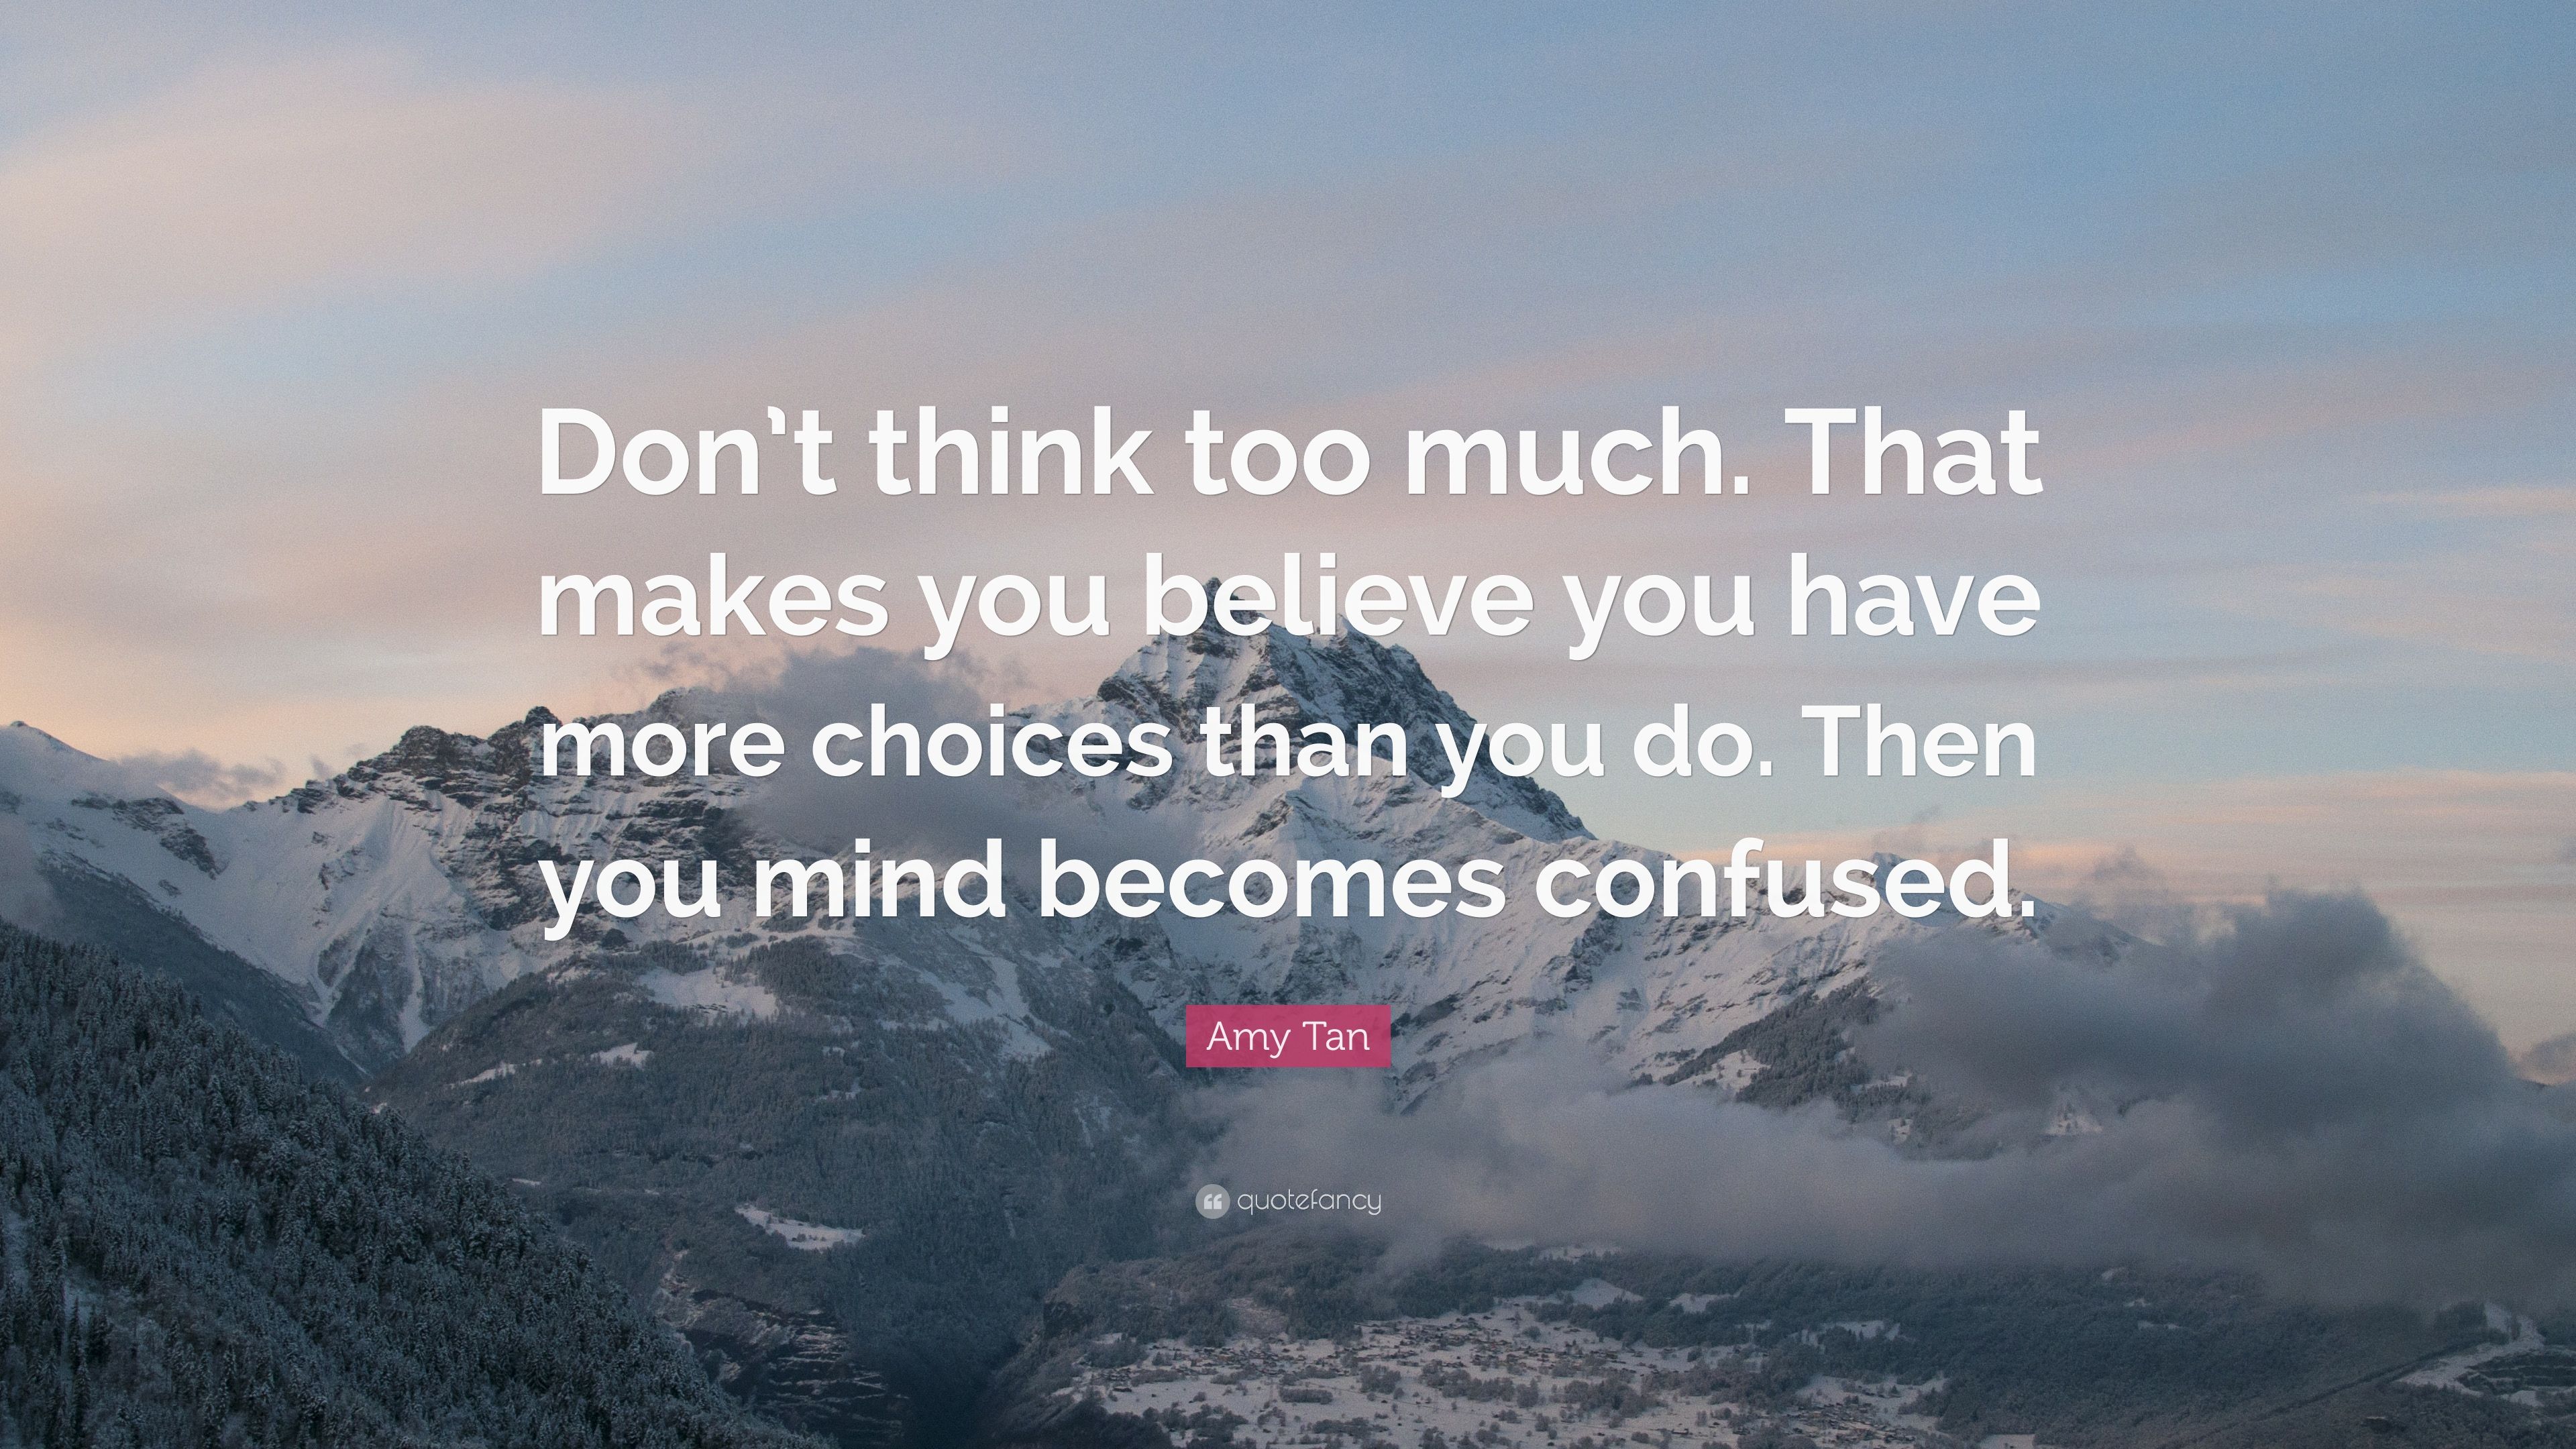 Amy Tan Quote: “Don't think too much. That makes you believe you